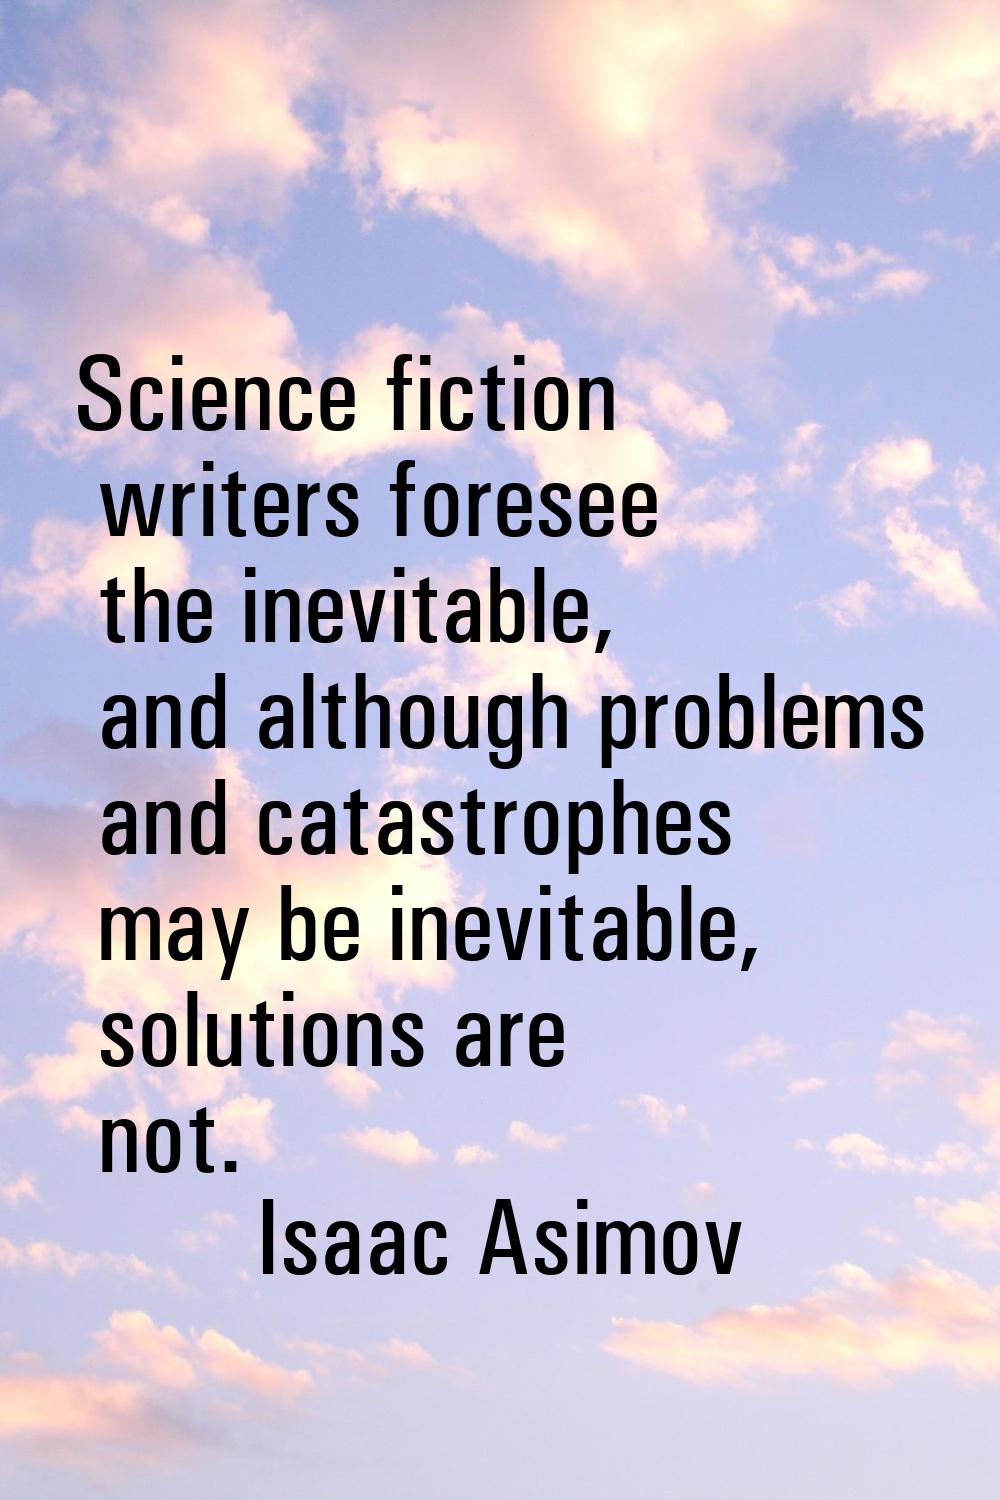 Science fiction writers foresee the inevitable, and although problems and catastrophes may be inevi